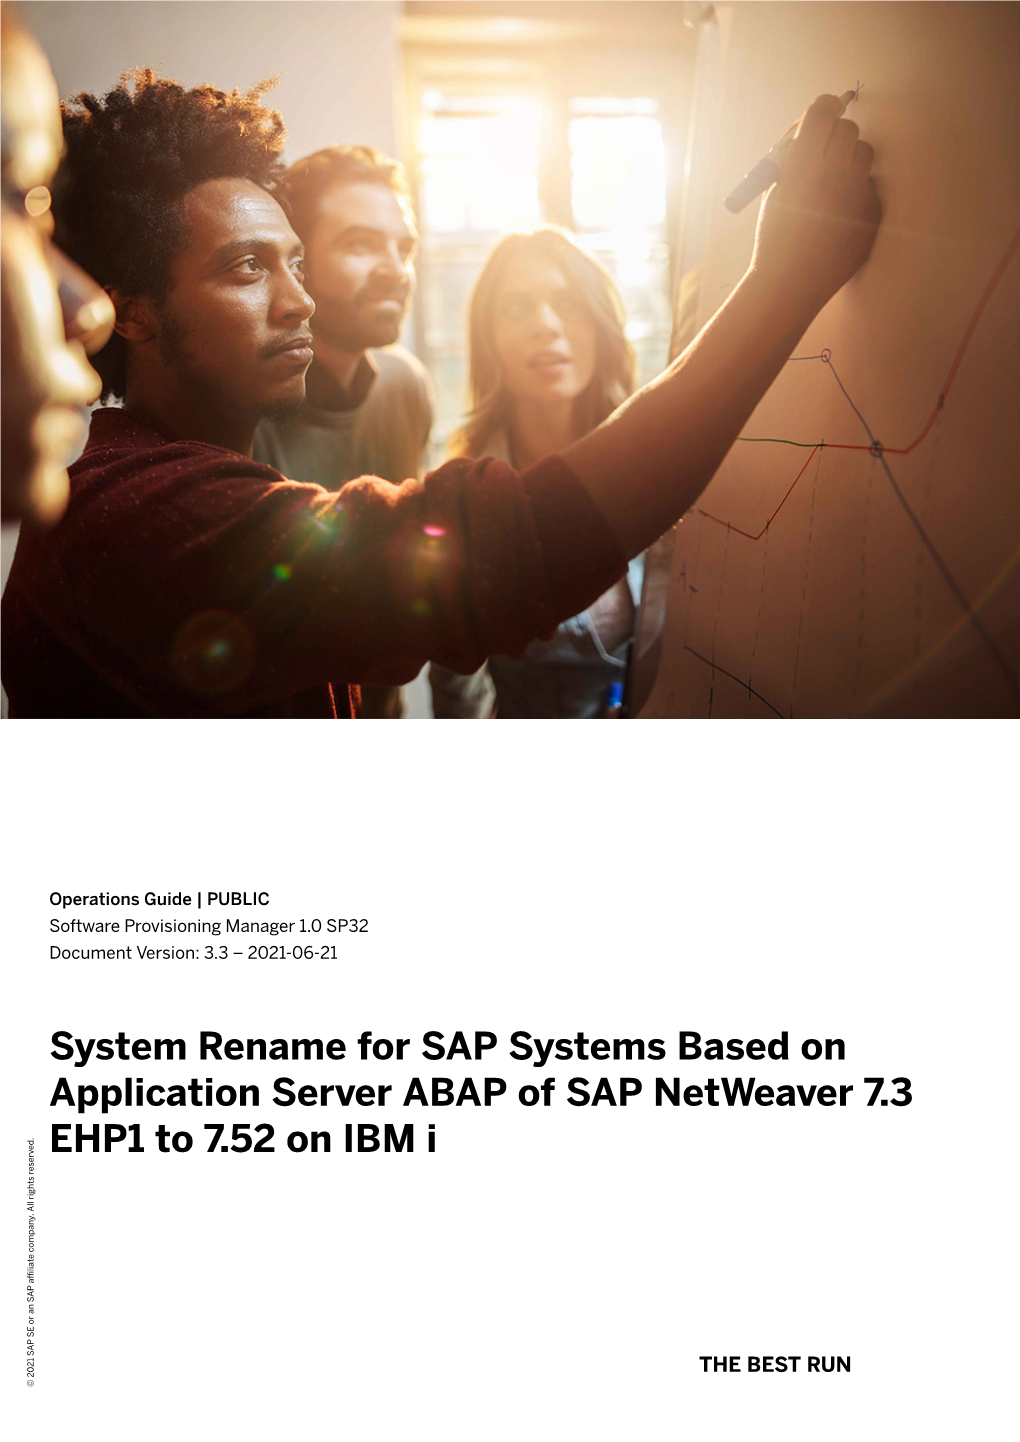 System Rename for SAP Systems Based on Application Server ABAP of SAP Netweaver 7.3 EHP1 to 7.52 on IBM I Company